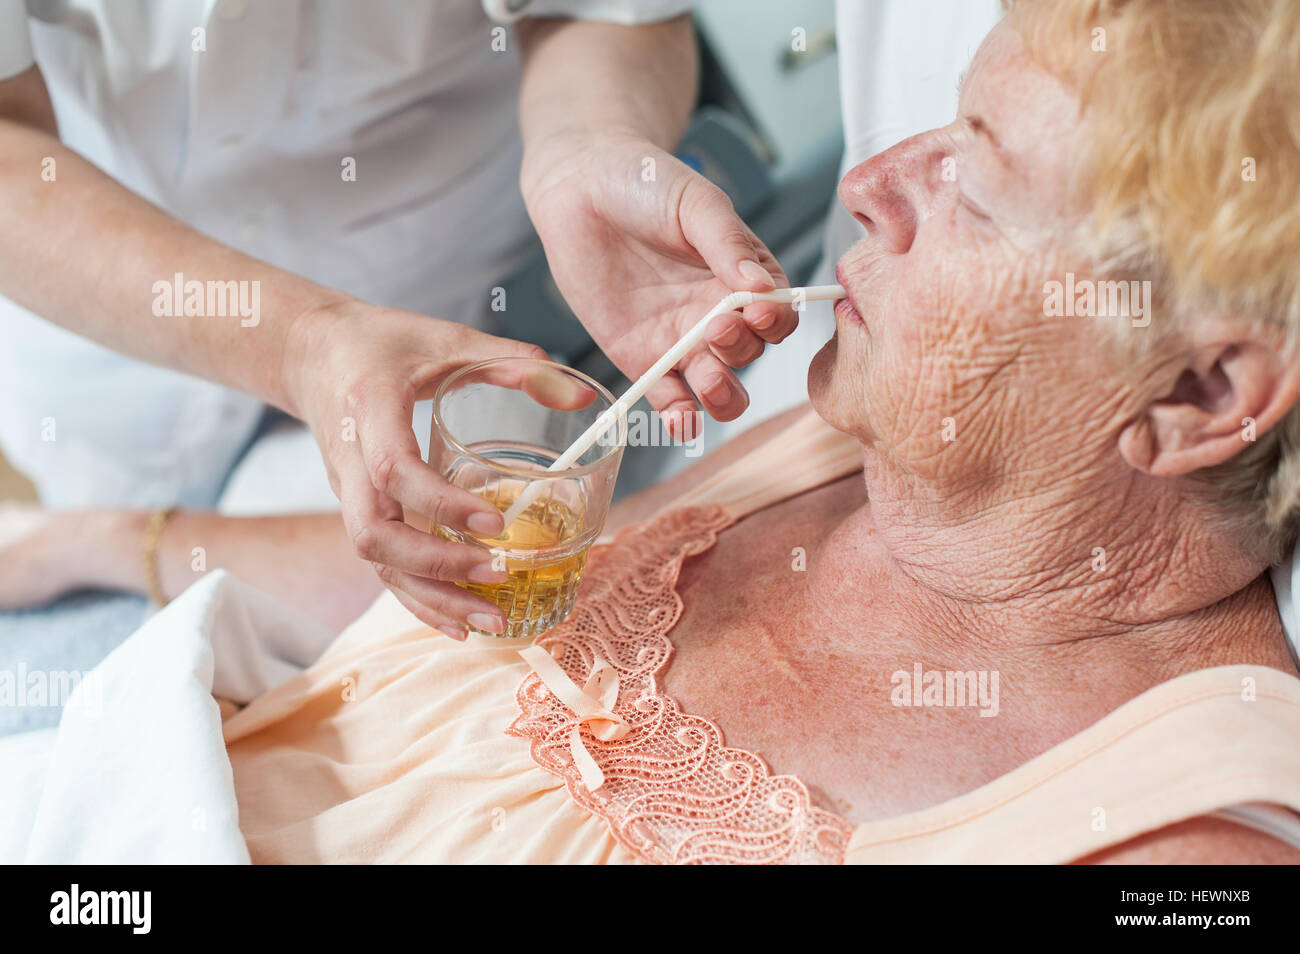 Nurse helping patient in hospital bed take a drink Stock Photo